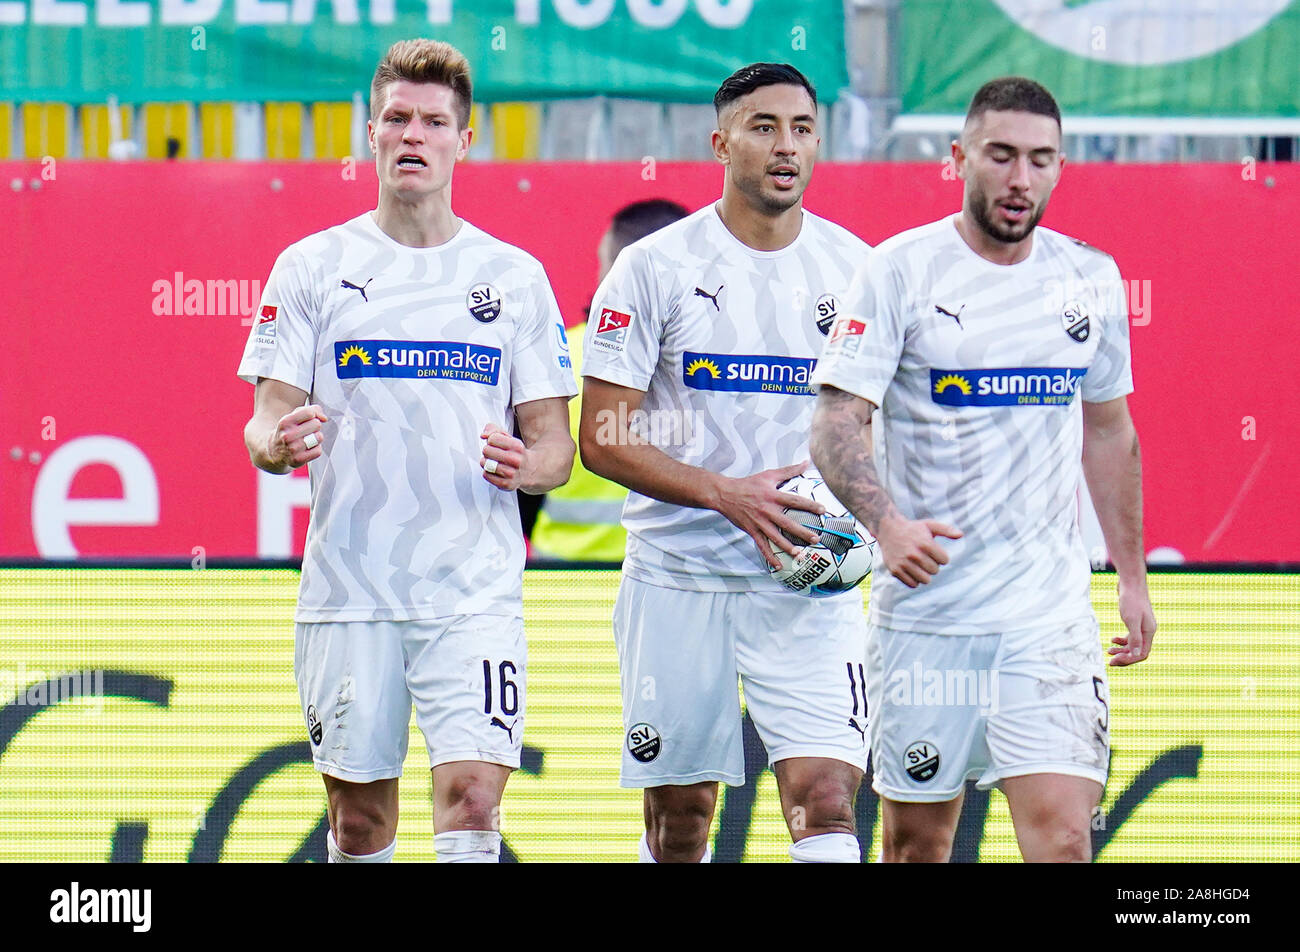 Sandhausen, Germany. 09th Nov, 2019. Soccer: 2nd Bundesliga, SV Sandhausen - SpVgg Greuther Fürth, 13th matchday, in the Hardtwaldstadion. Sandhausens goal scorer Kevin Behrens (l) cheers with Sandhausens Aziz Bouhaddouz (M) and Marlon Frey over the goal to 2:2. Credit: Uwe Anspach/dpa - IMPORTANT NOTE: In accordance with the requirements of the DFL Deutsche Fußball Liga or the DFB Deutscher Fußball-Bund, it is prohibited to use or have used photographs taken in the stadium and/or the match in the form of sequence images and/or video-like photo sequences./dpa/Alamy Live News Stock Photo